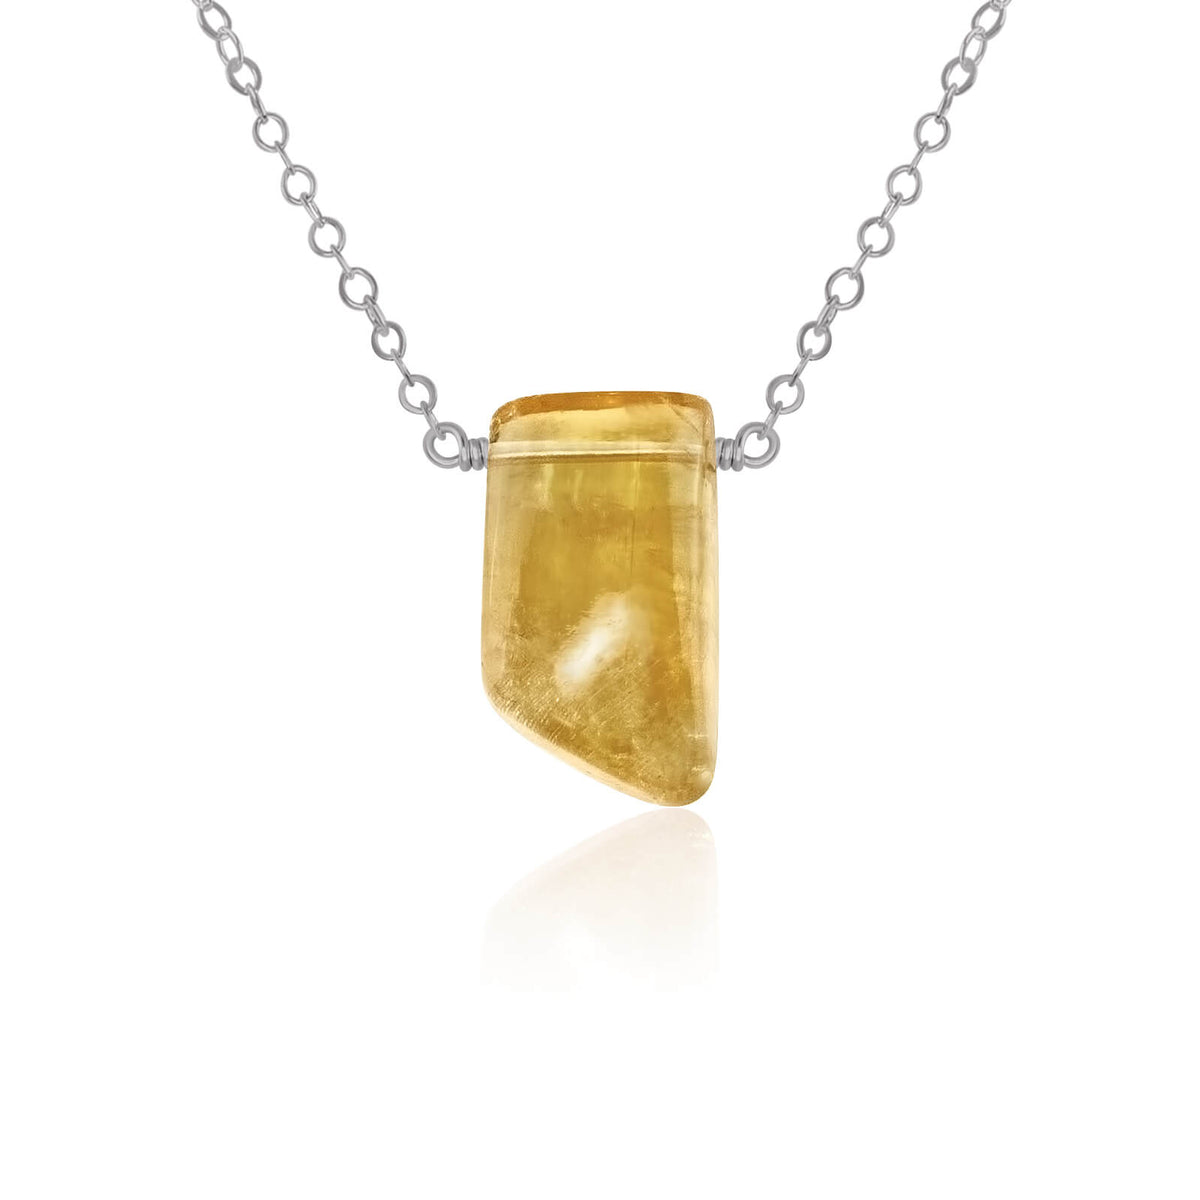 Small Smooth Slab Point Necklace - Citrine - Stainless Steel - Luna Tide Handmade Jewellery